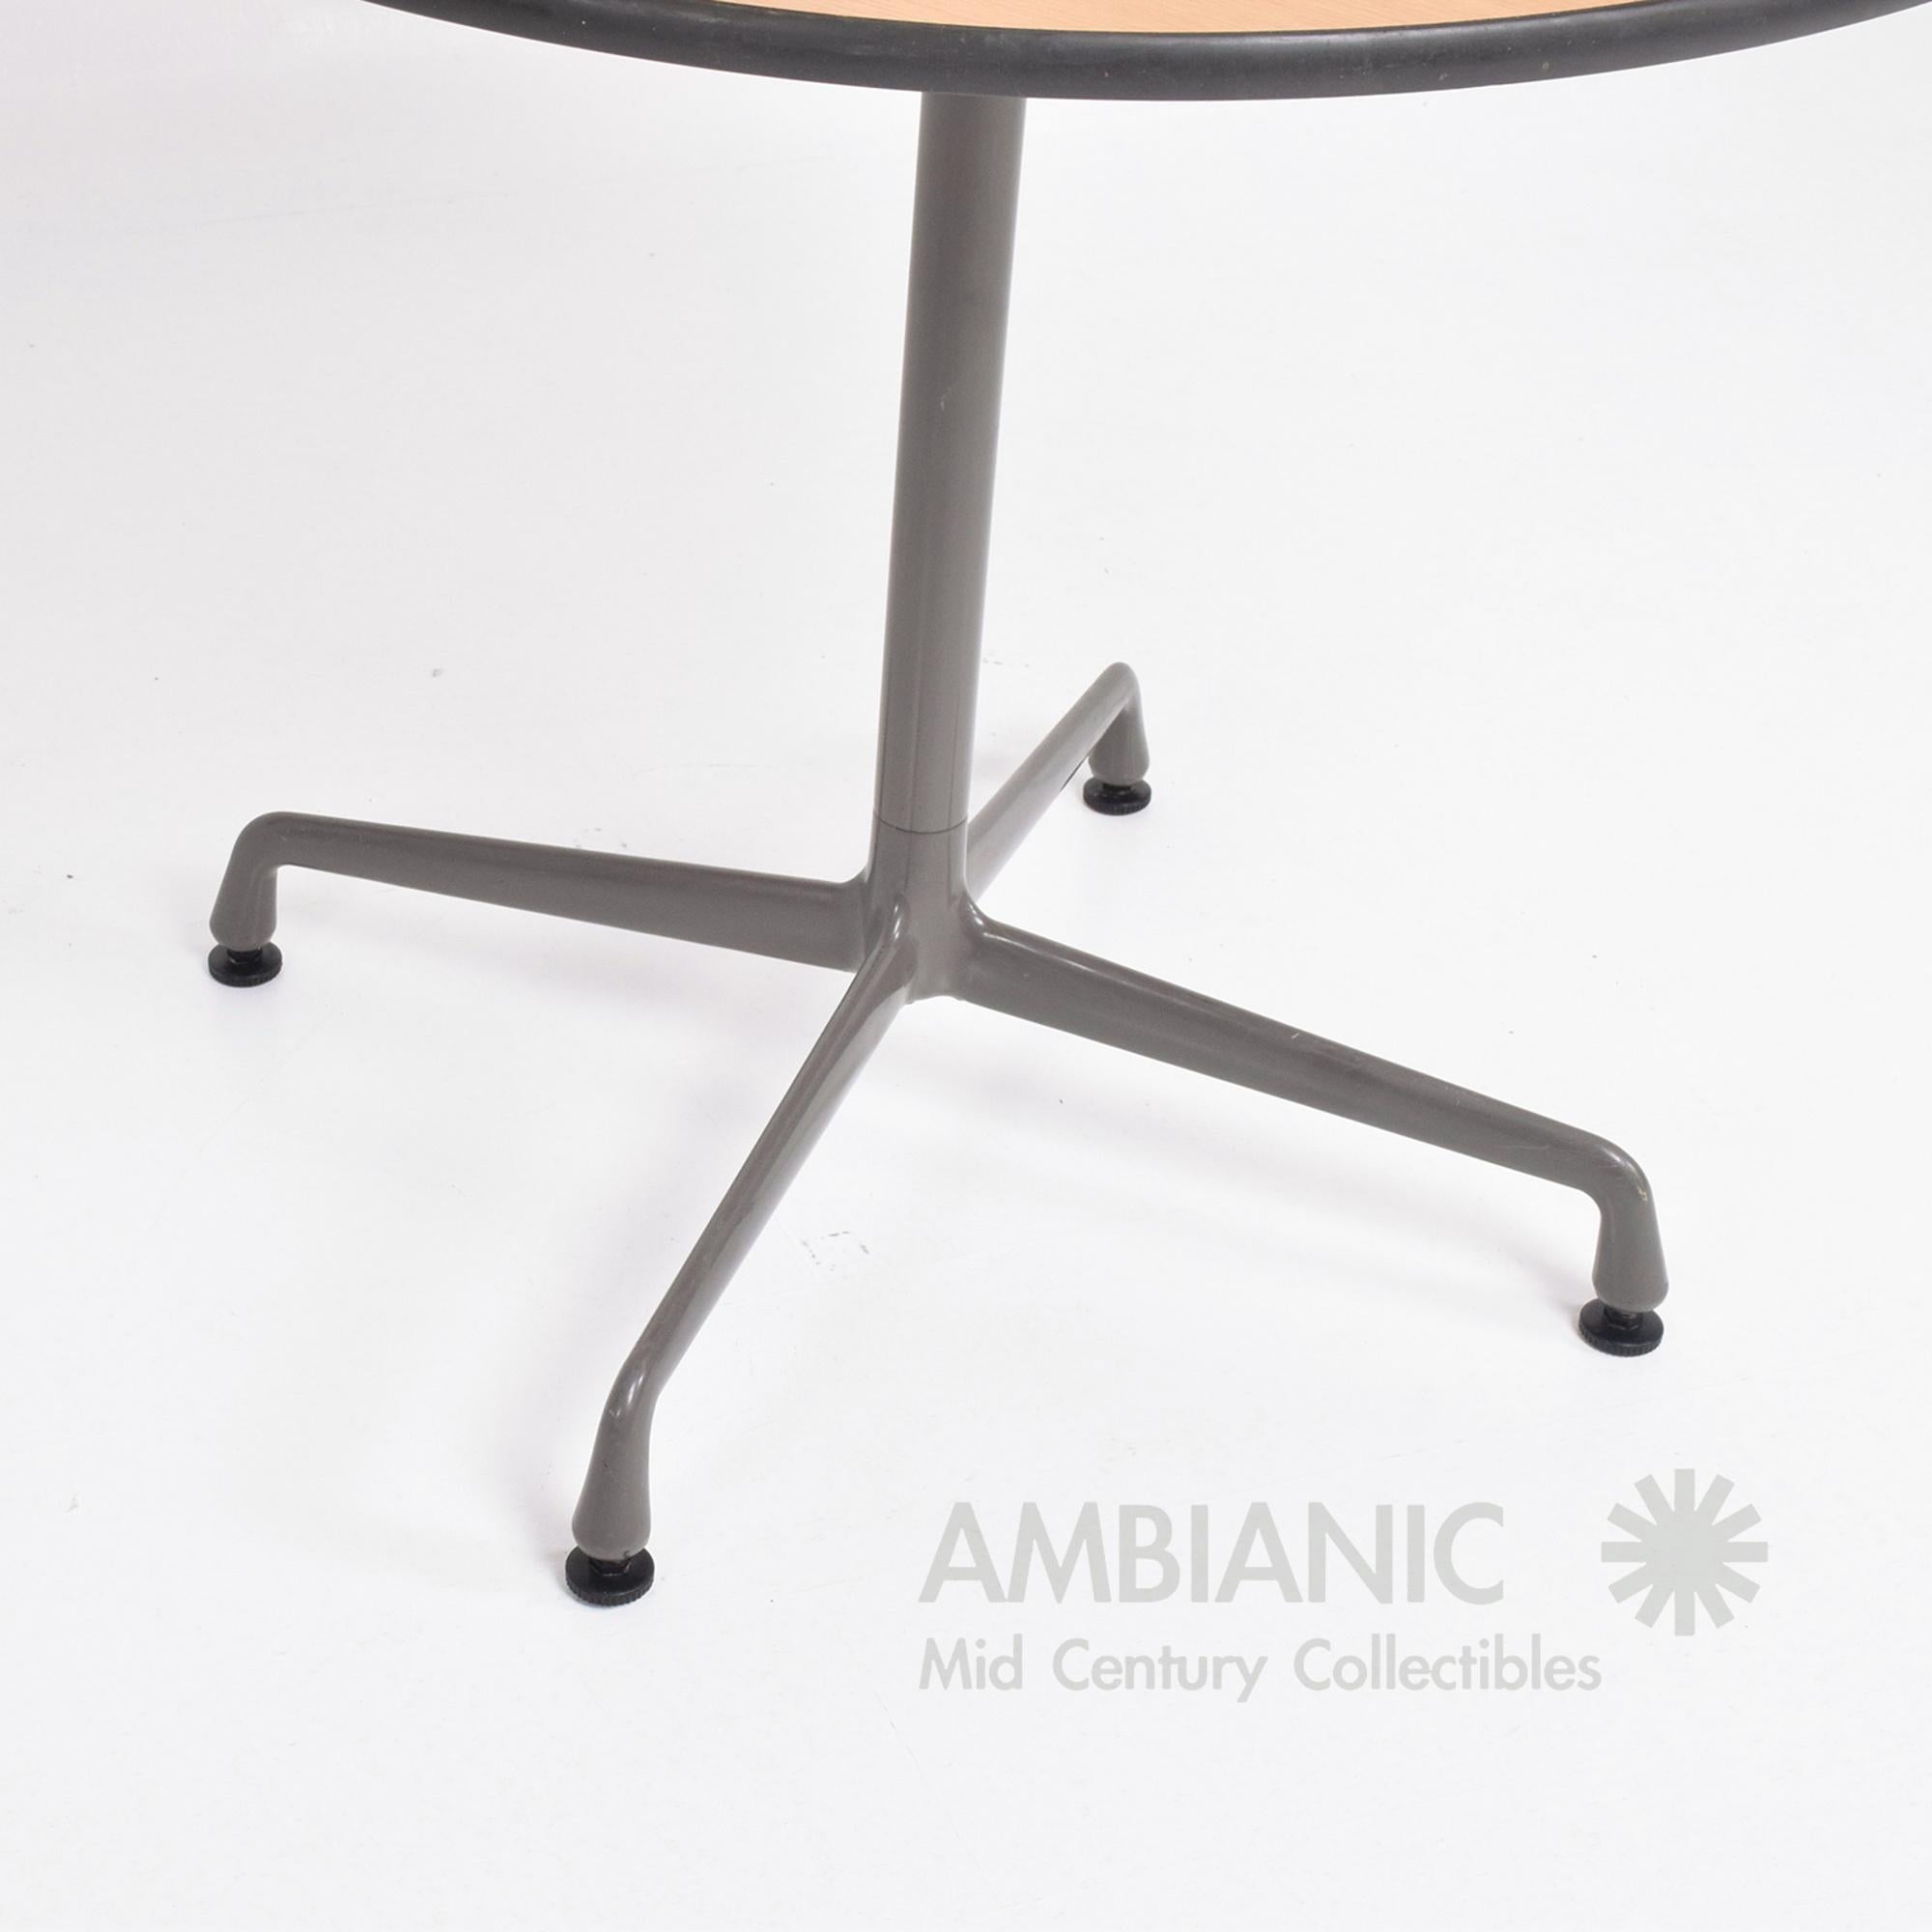 Mid-20th Century Charles Eames Aluminum Group Small Round Office Table Herman Miller 1960s